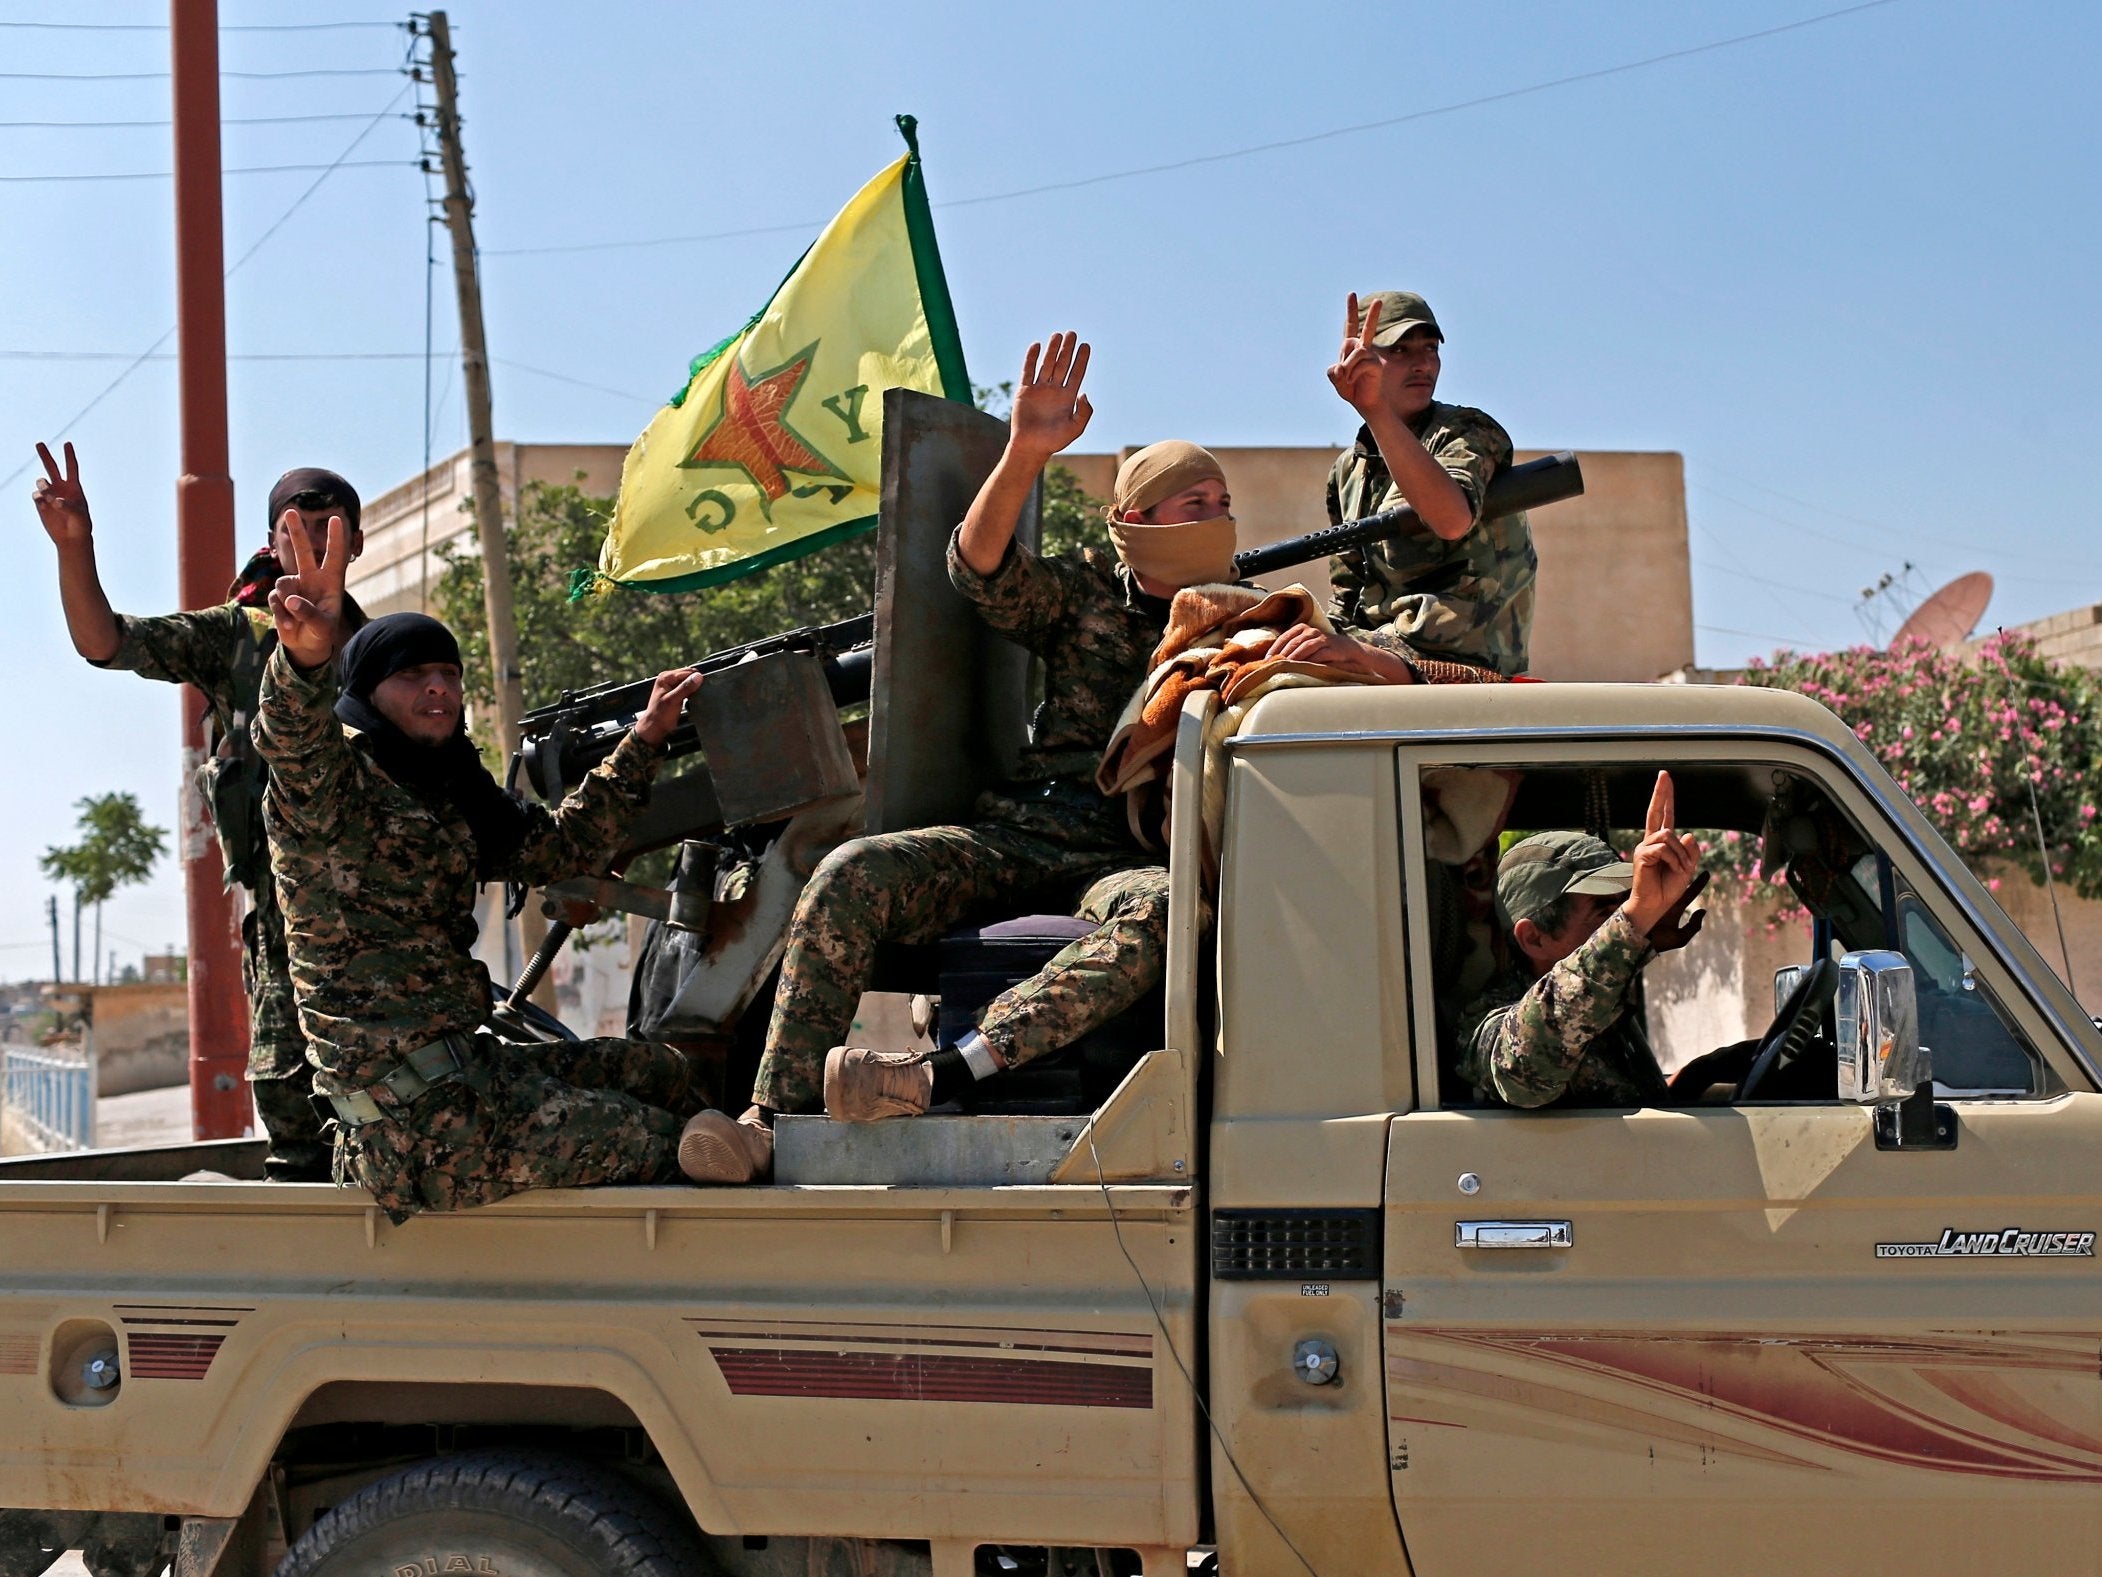 The YPG has driven Isis out of its former territories in Syria